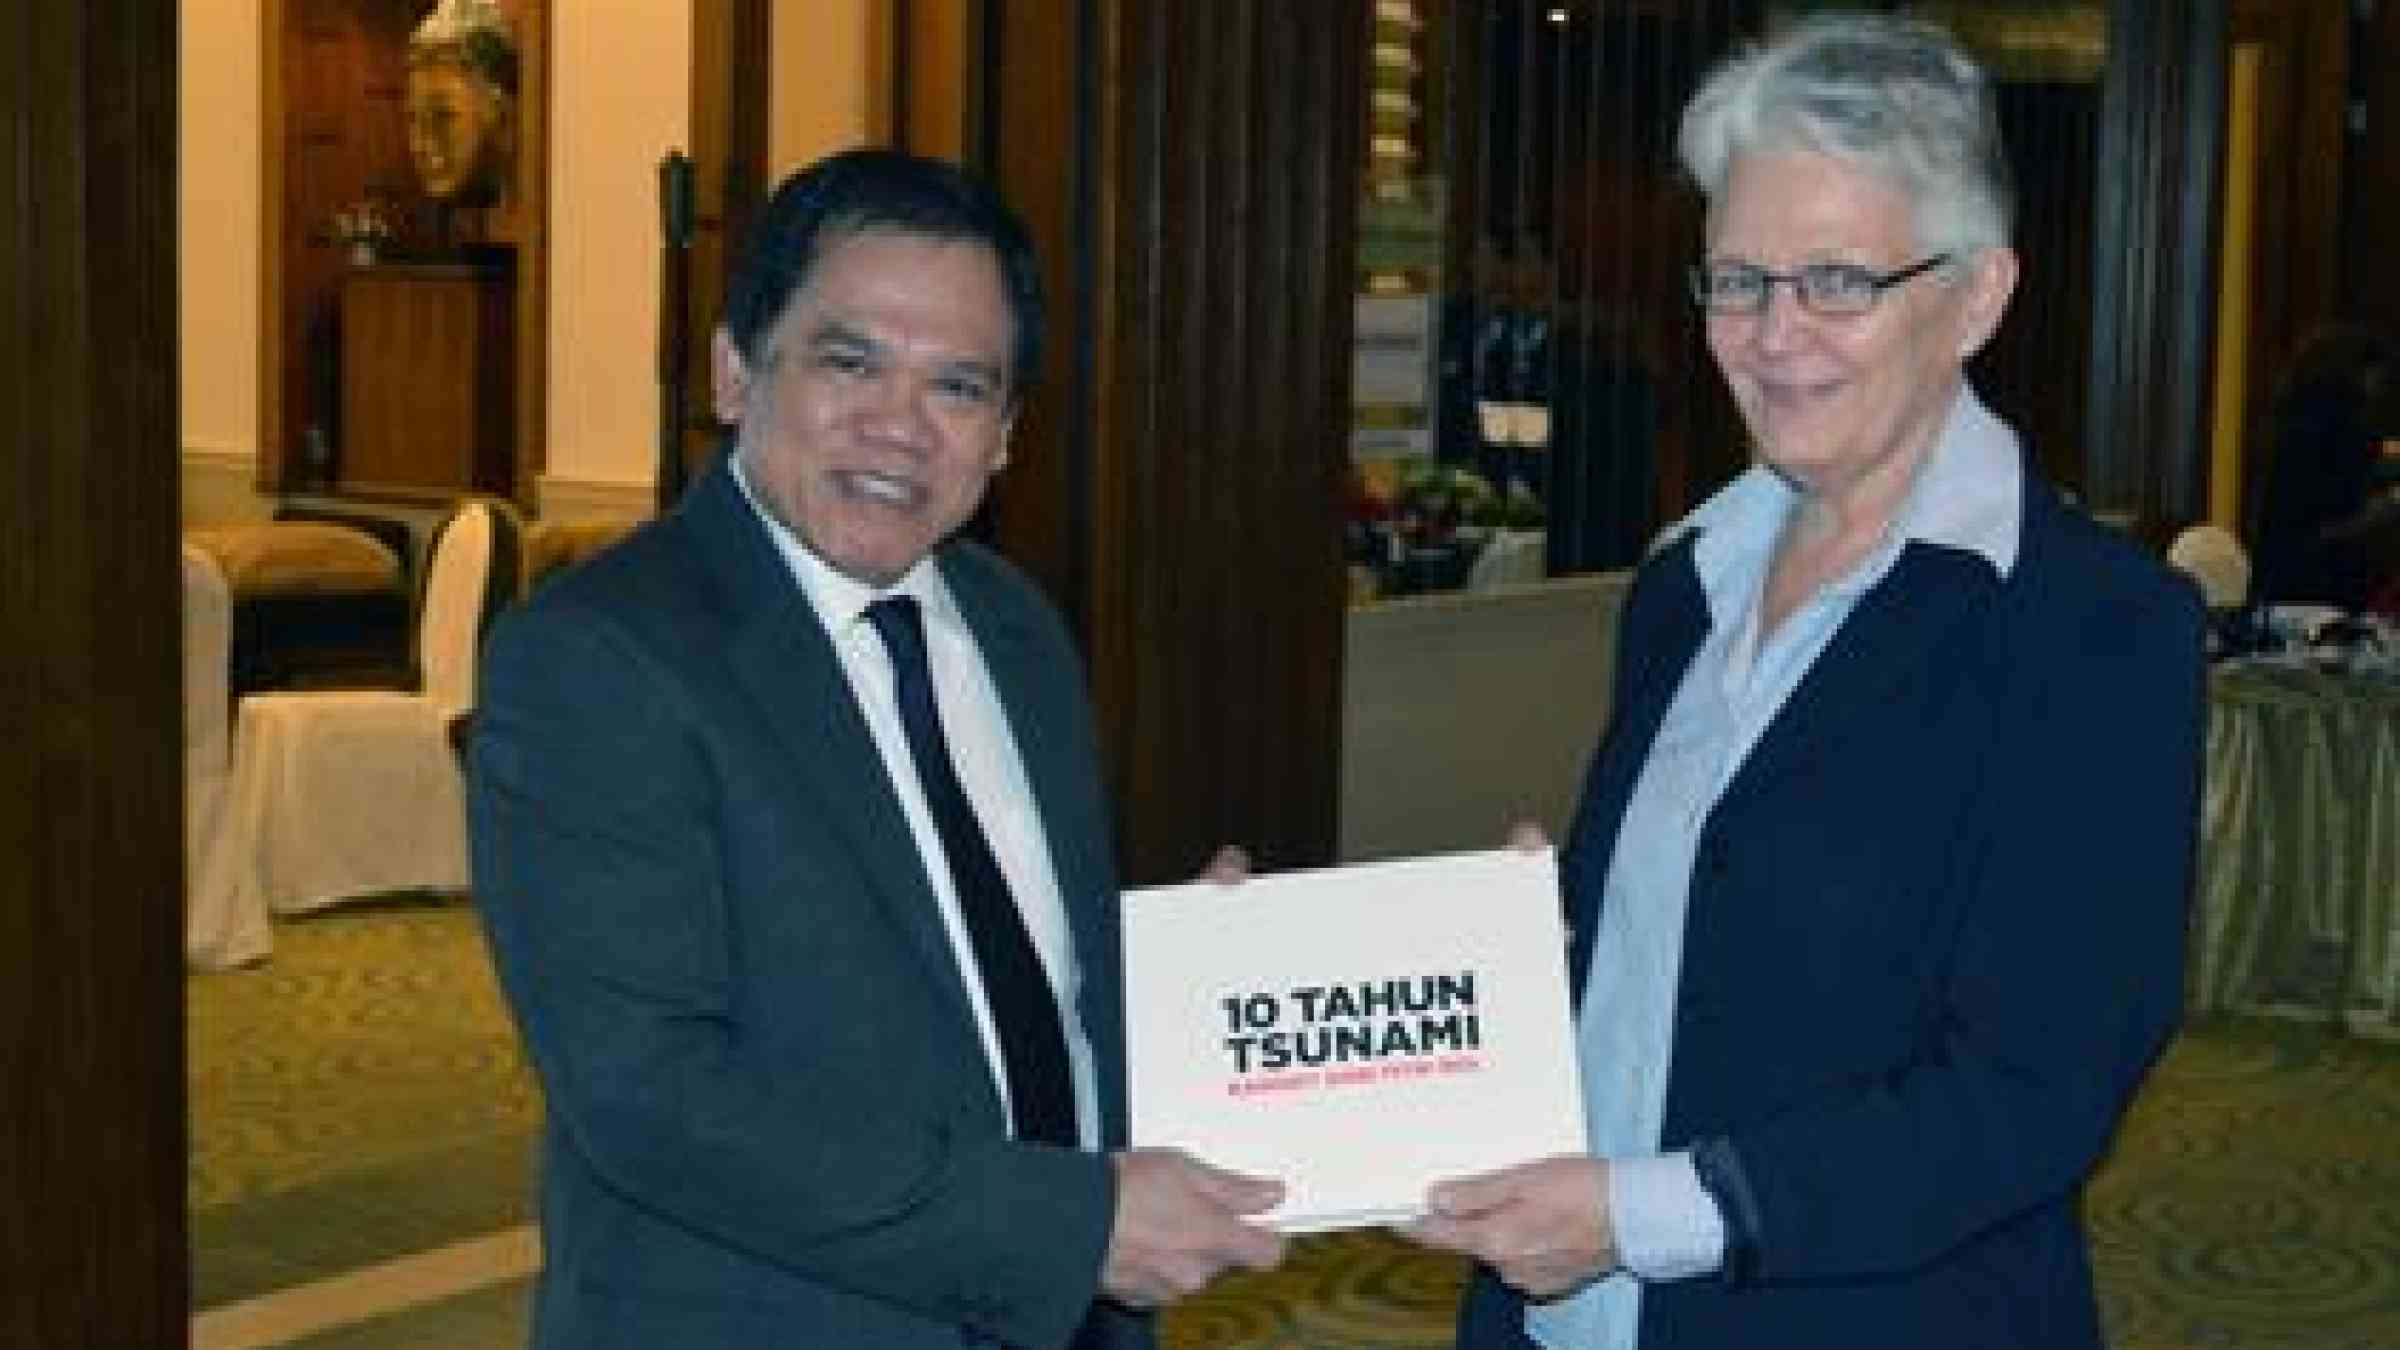 UNISDR Chief Margareta Wahlström receives a book on the 2004 tsunami ten years after from former Indonesian BNPB chief M. Sugeng Triutomo. (Photo: UNISDR)